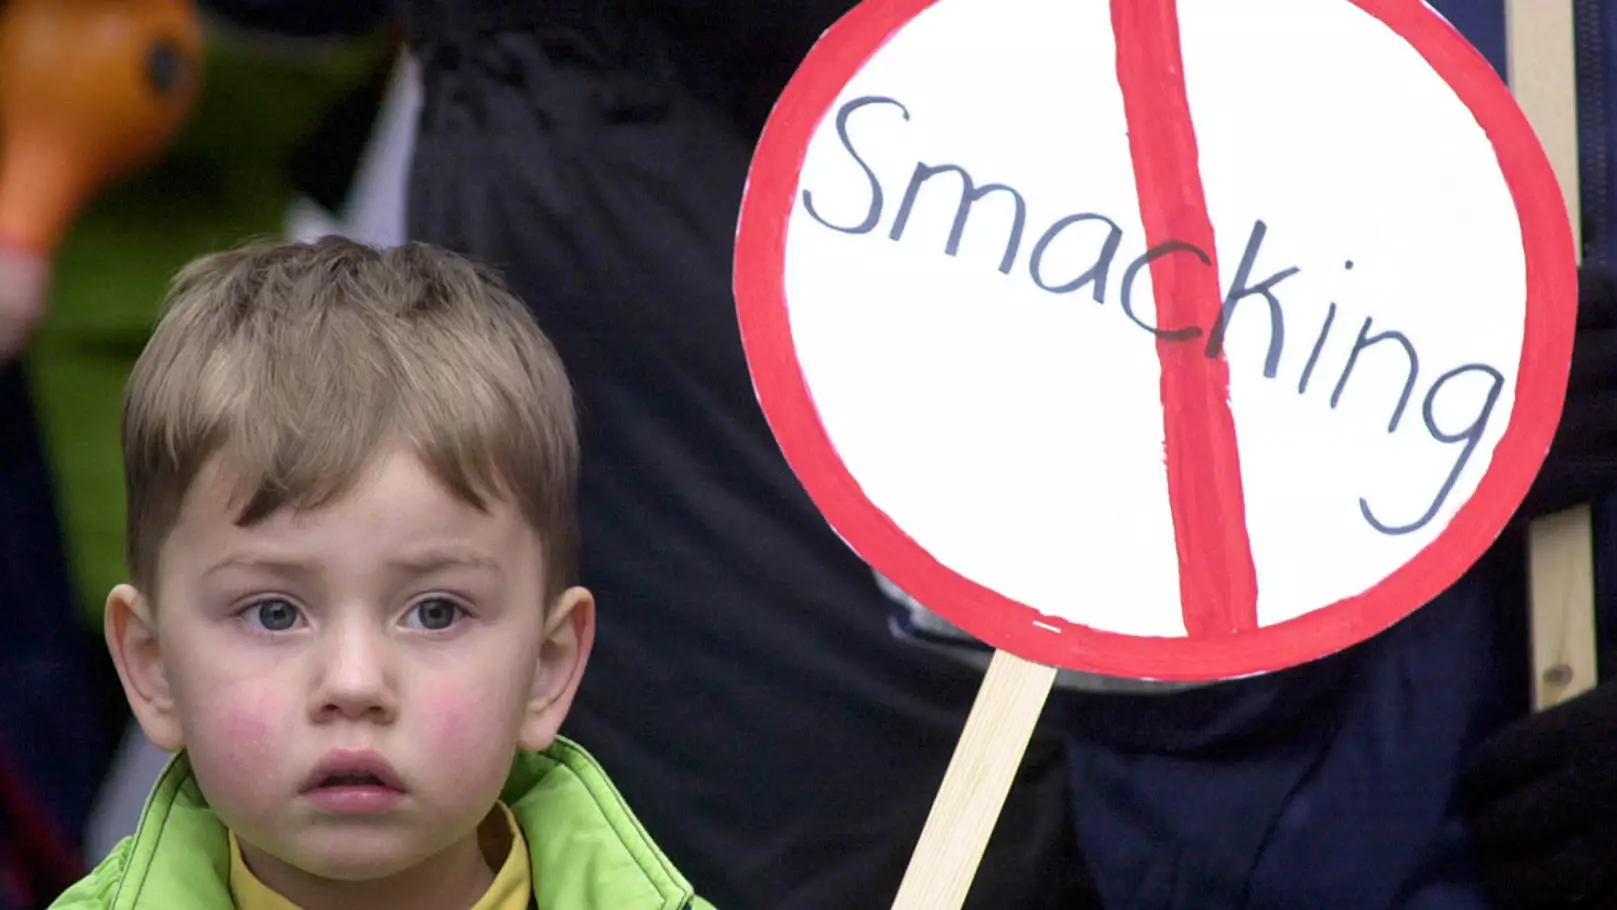 Australians Are Divided On Whether Smacking Your Kids Is Okay